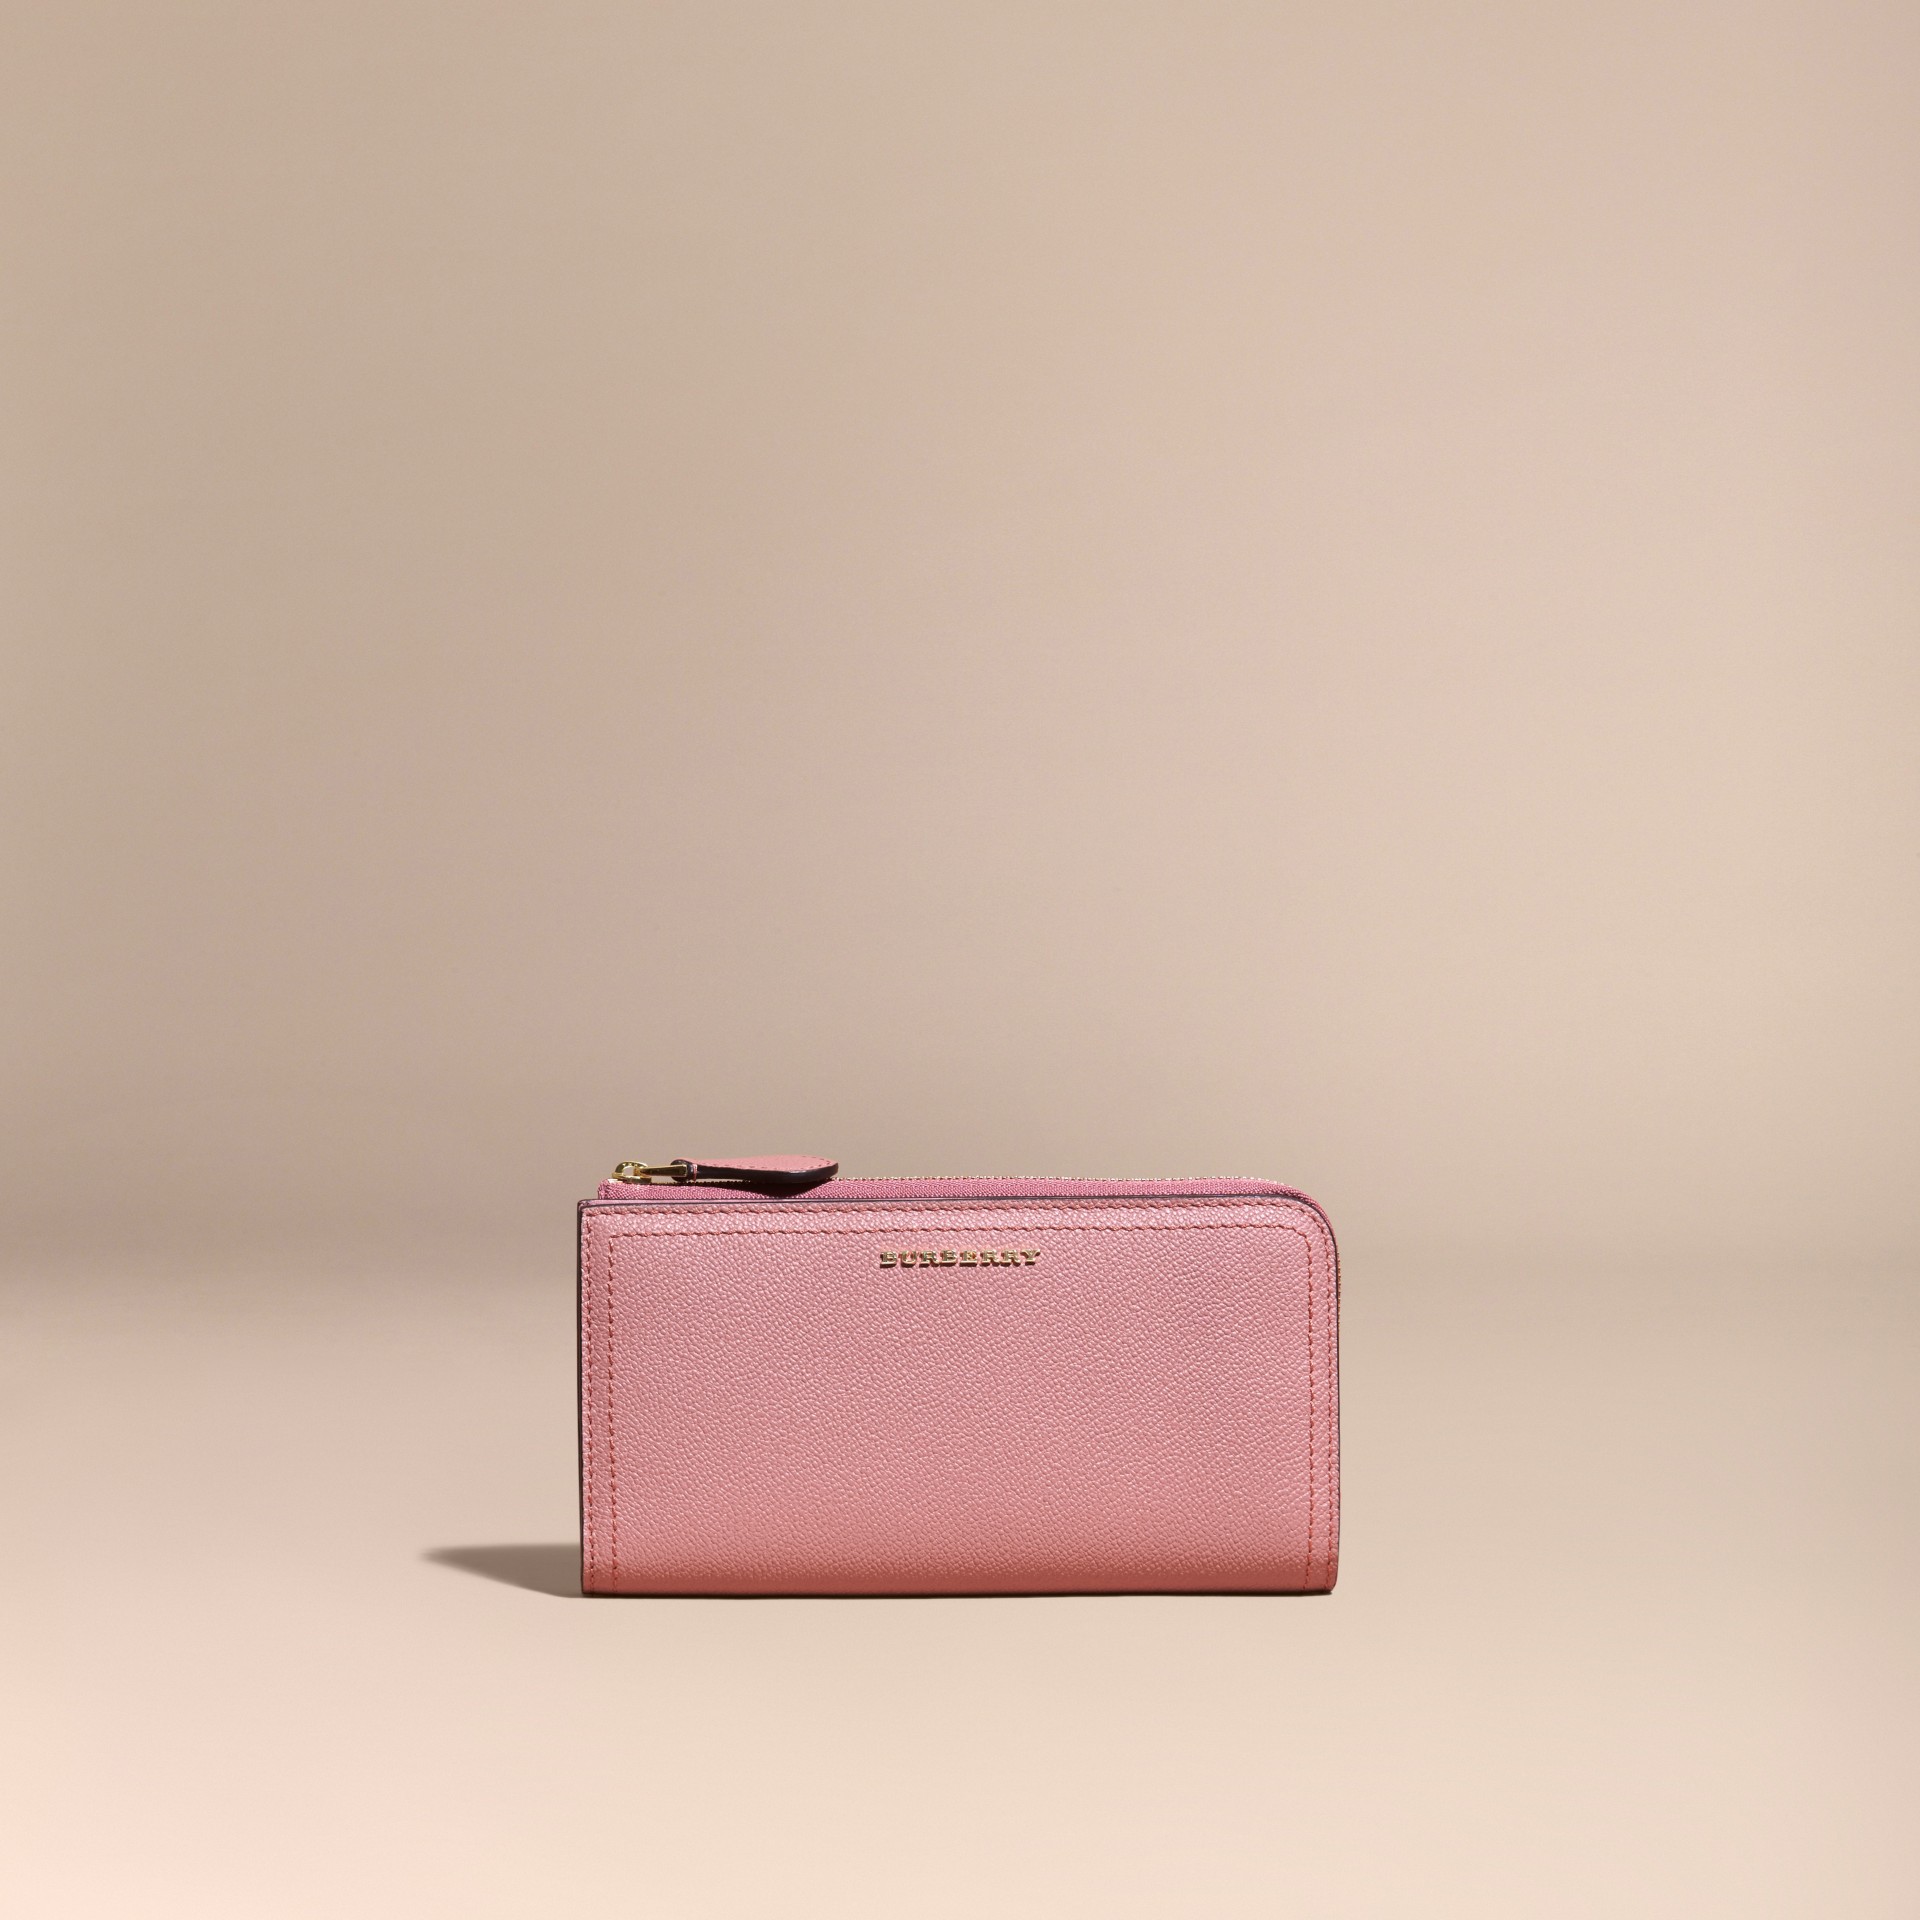 Grainy Leather Ziparound Wallet Dusty Pink | Burberry